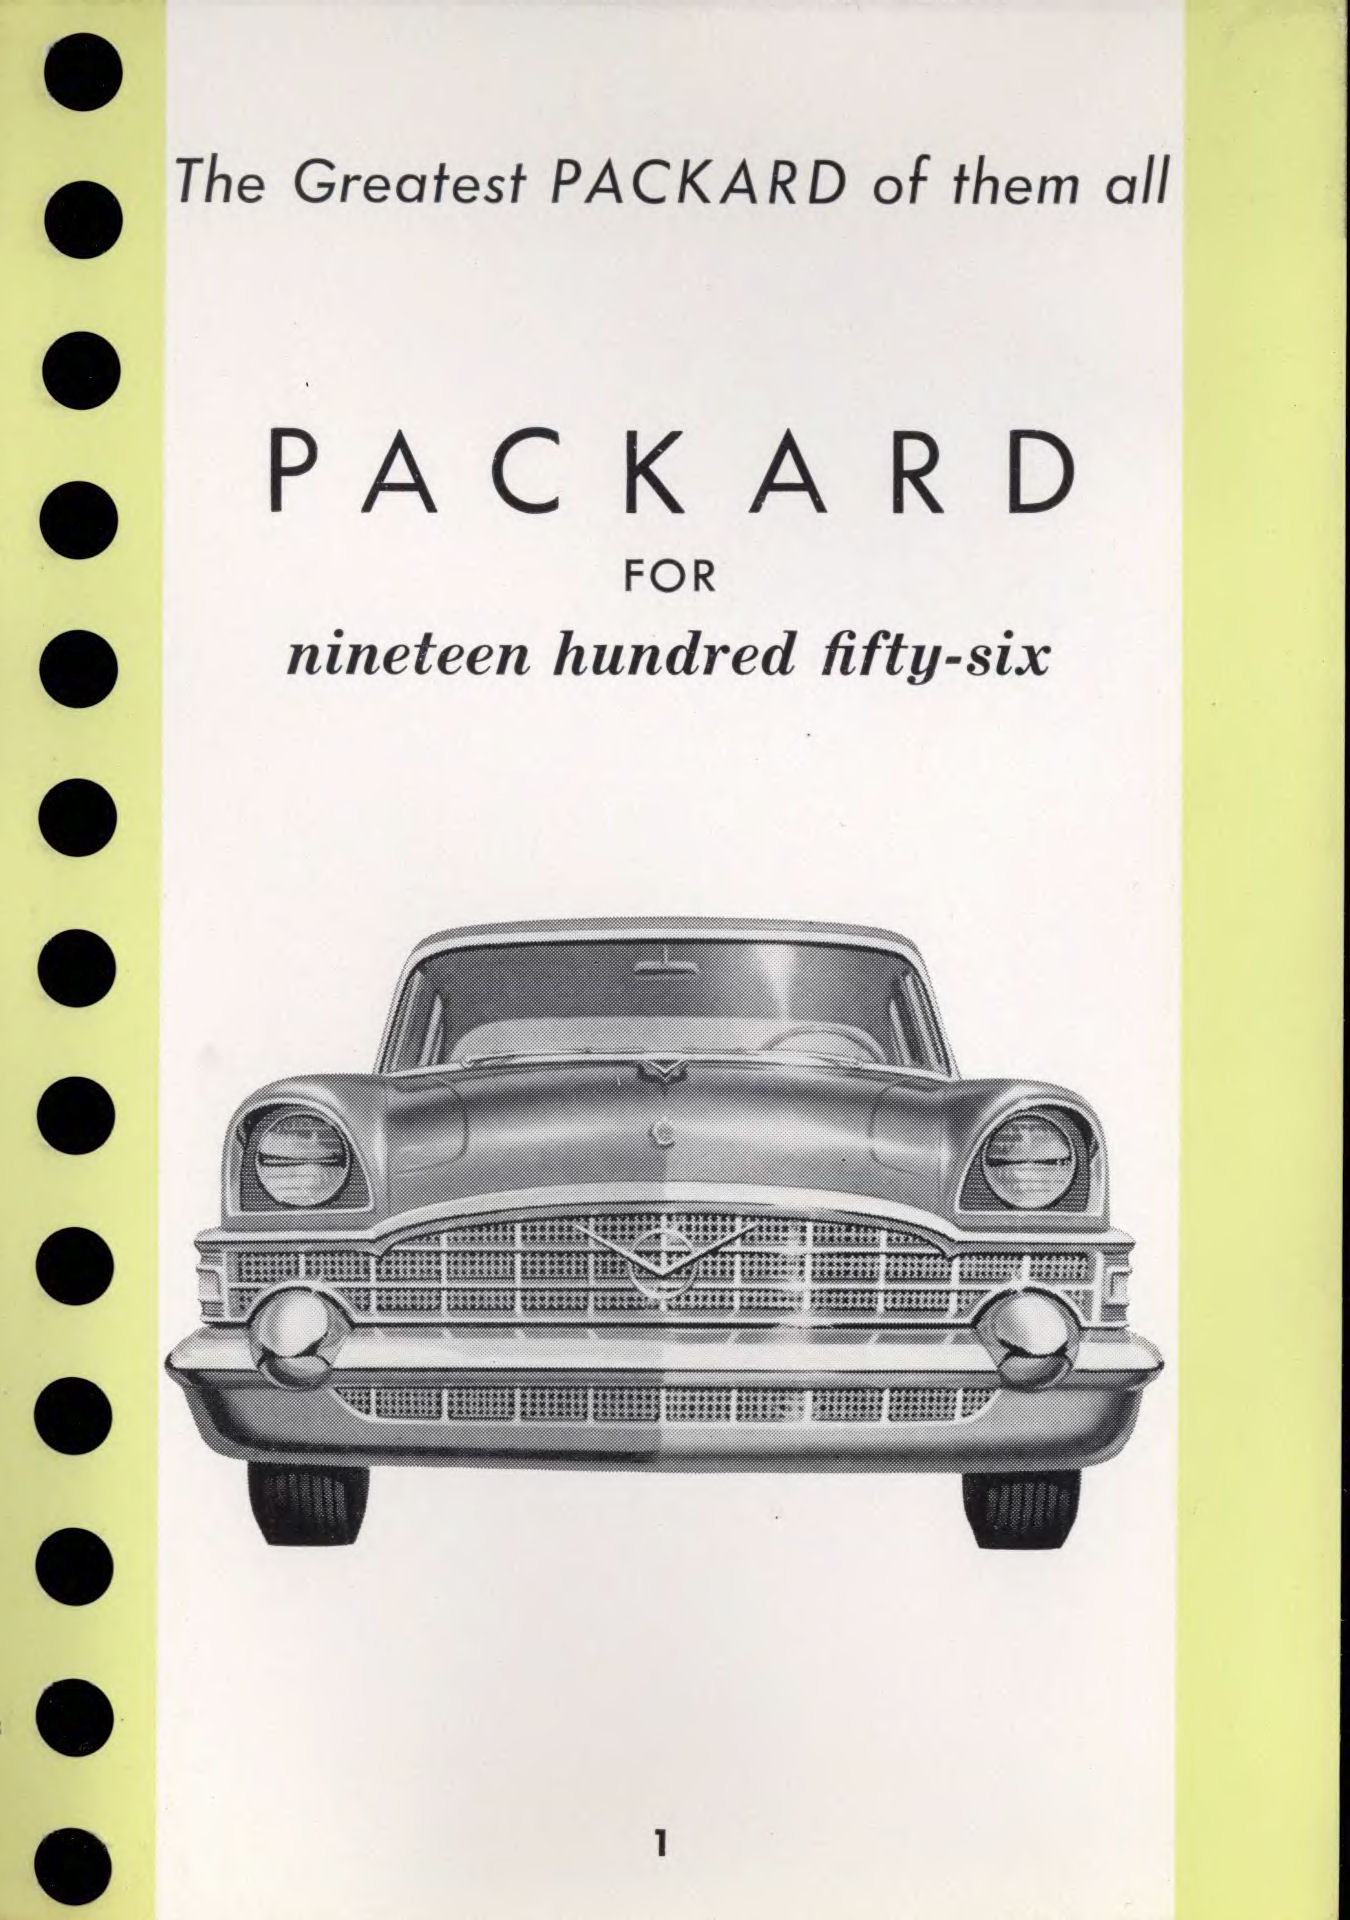 1956 Packard Data Book Page 98